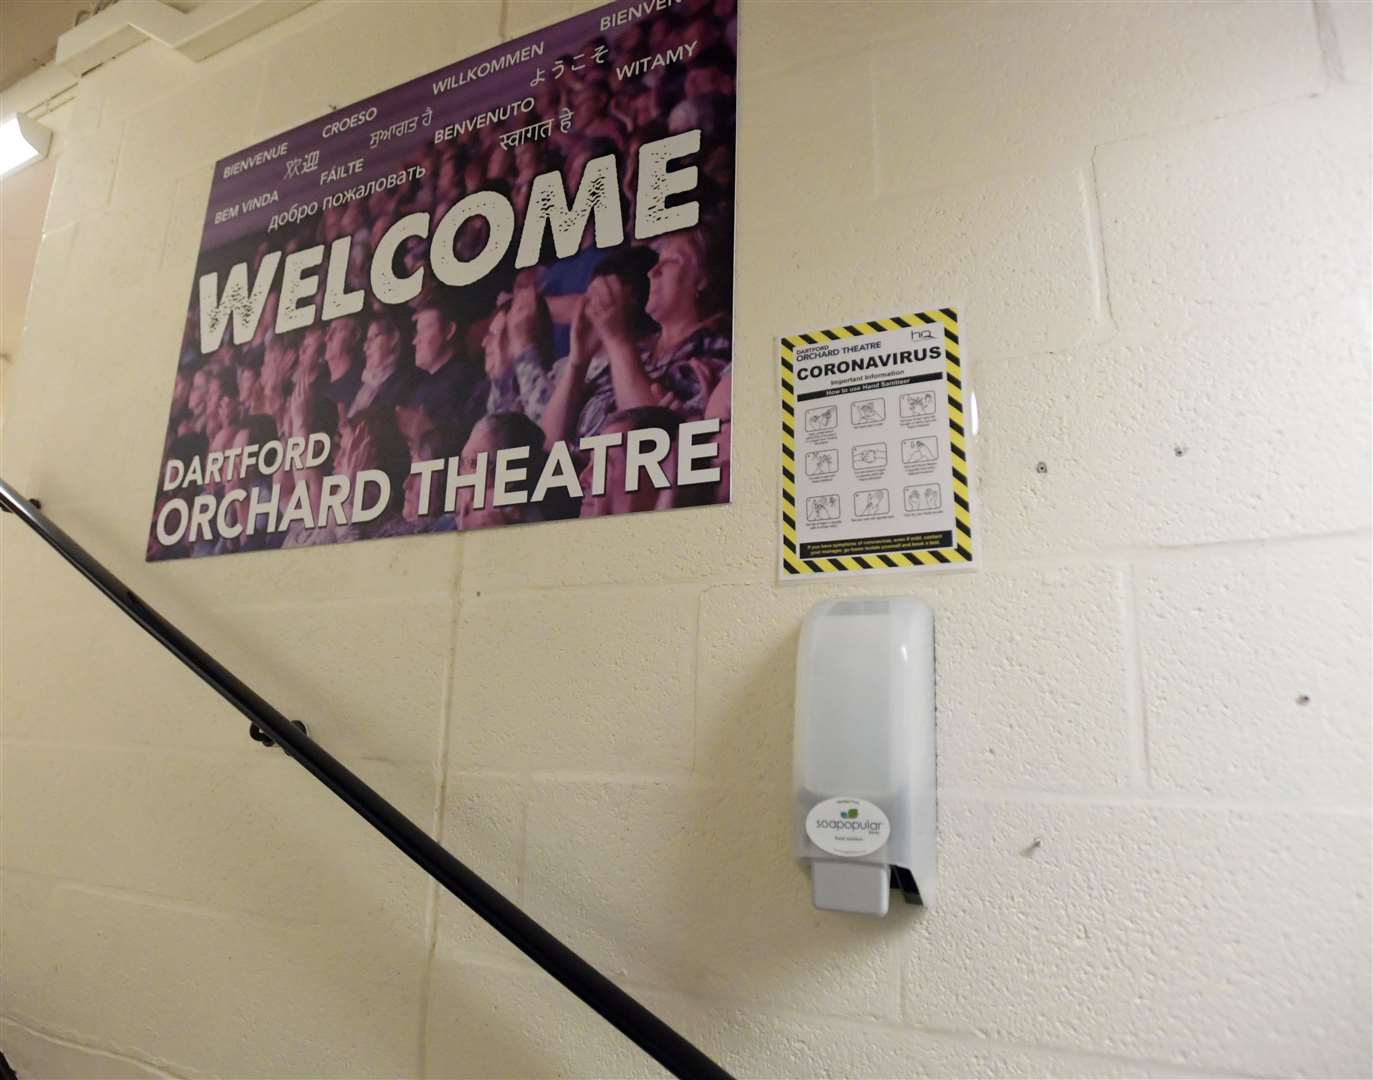 Social distancing reminders put in place at the venue. Picture: Barry Goodwin